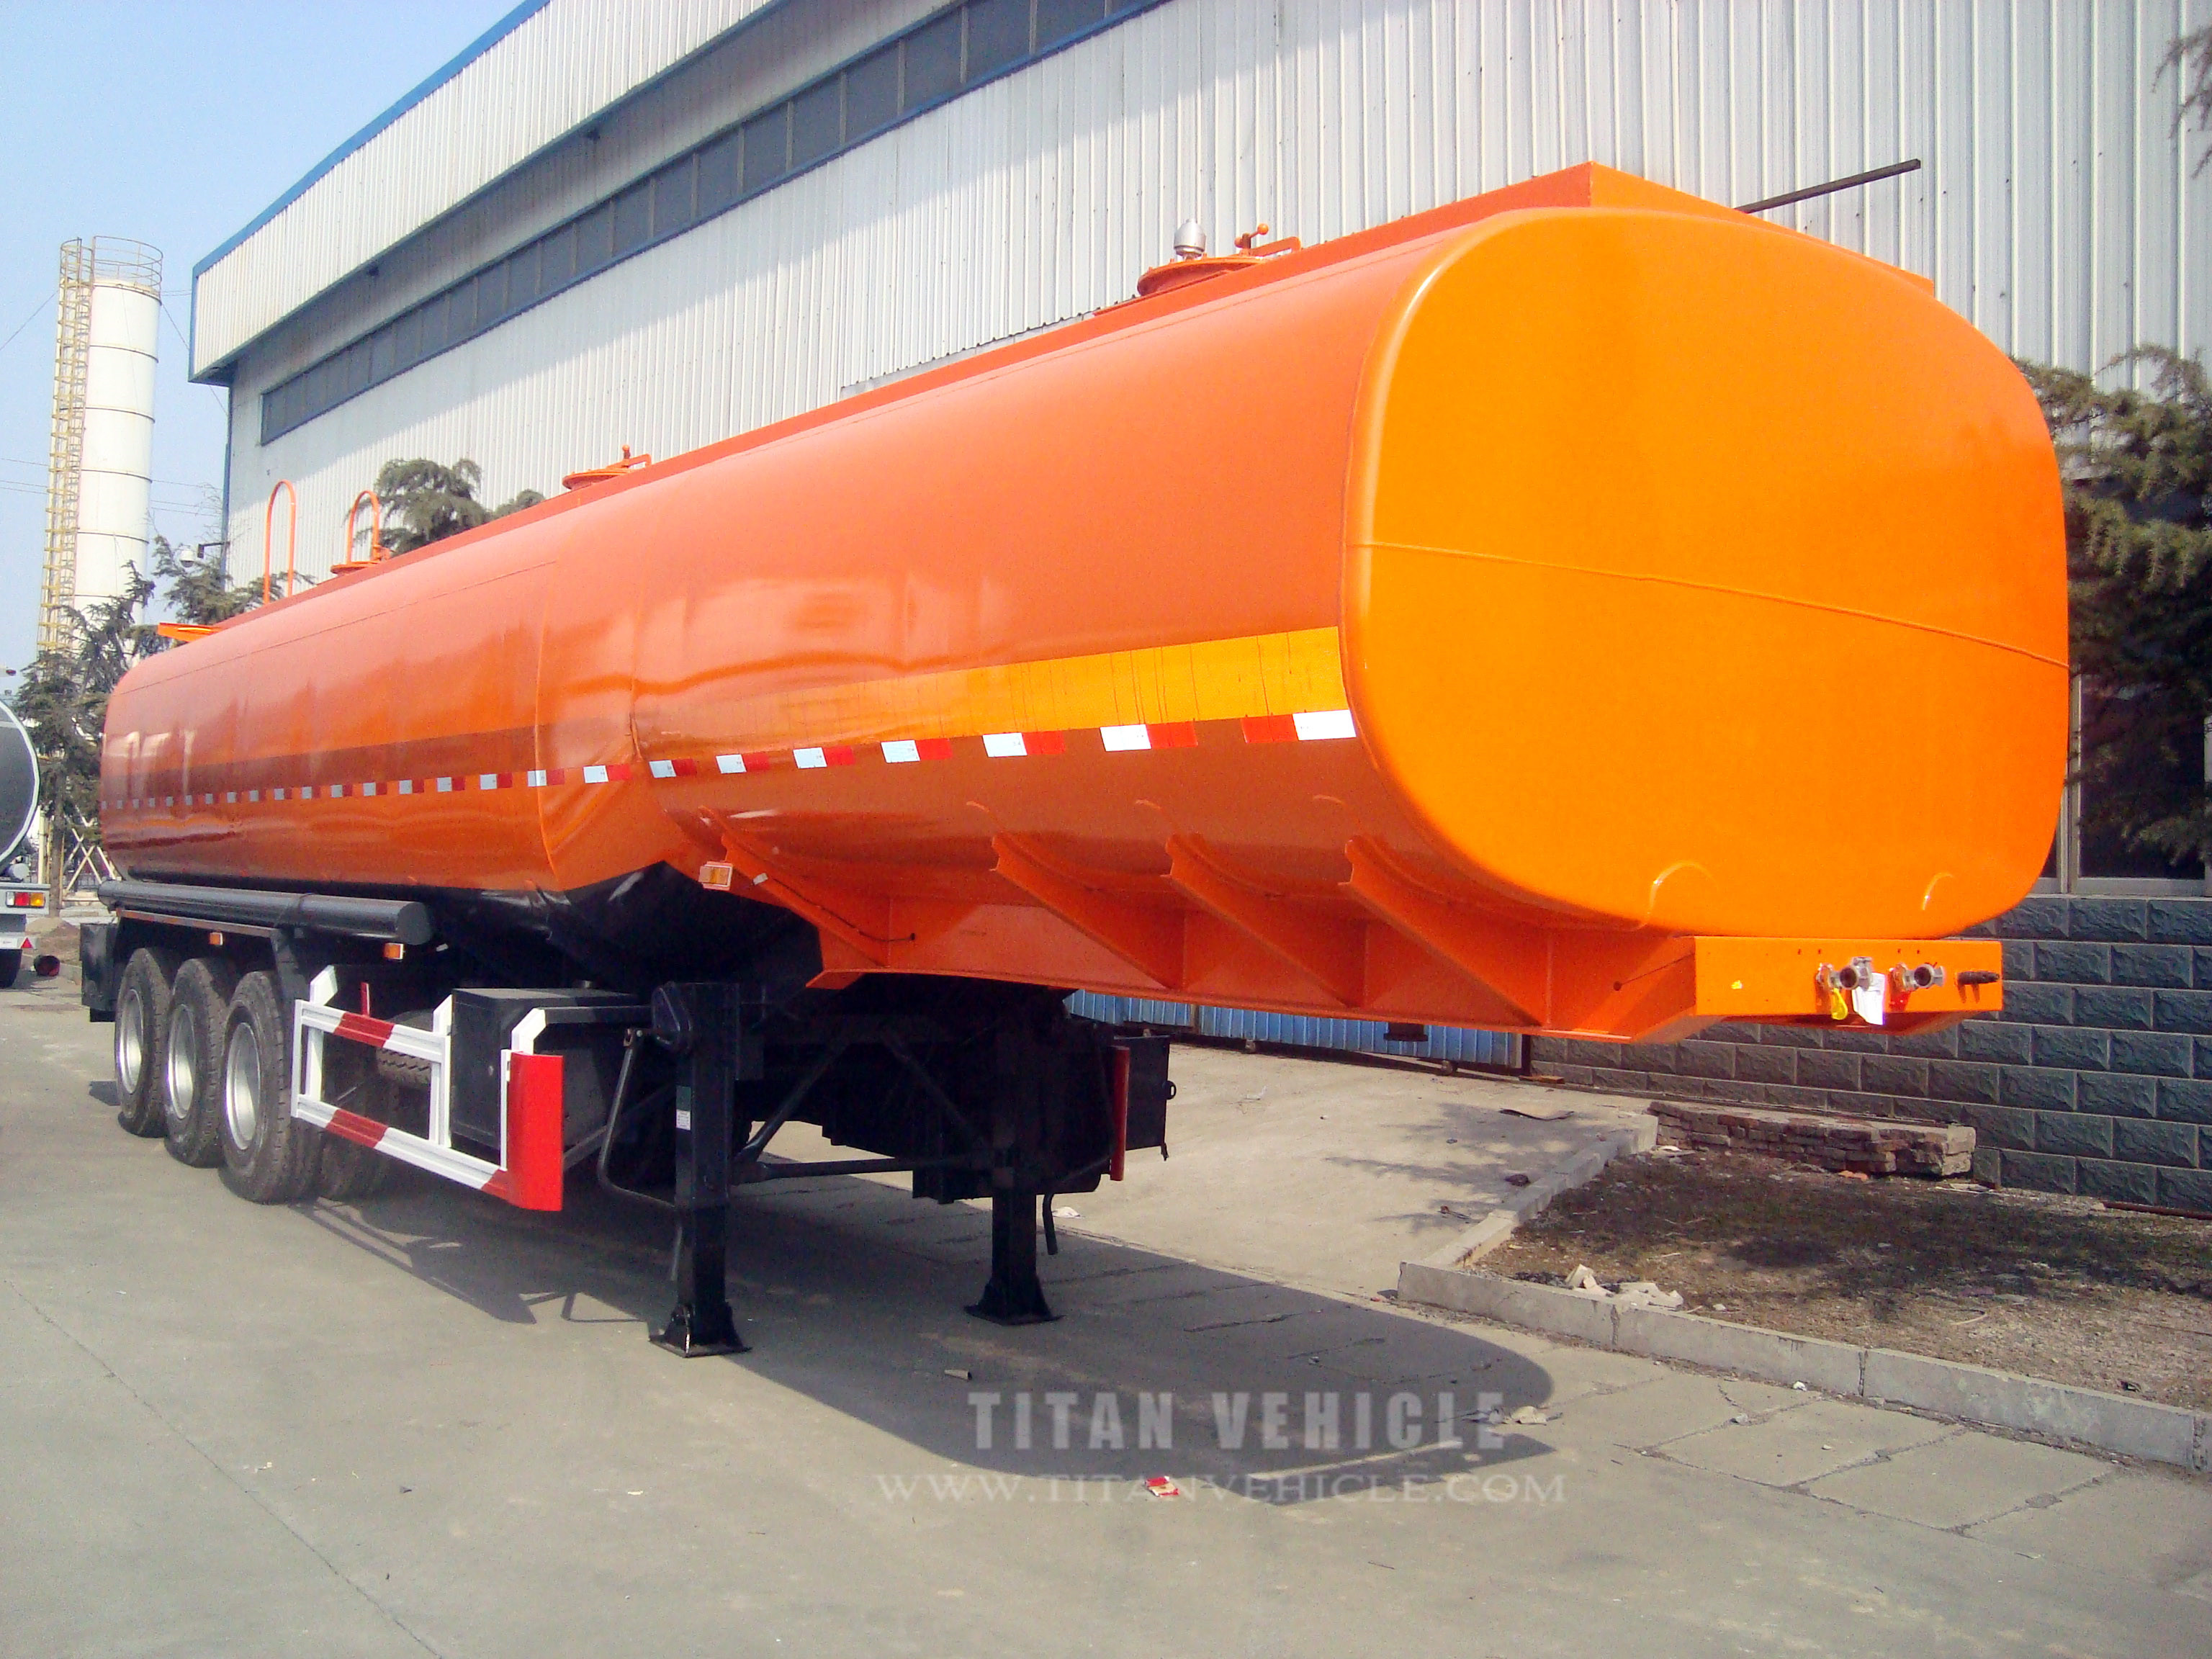 The fuel tank trailers service trailers made by Titan has been well received by customers in the feedback of the customers, and has been satisfied with the customers